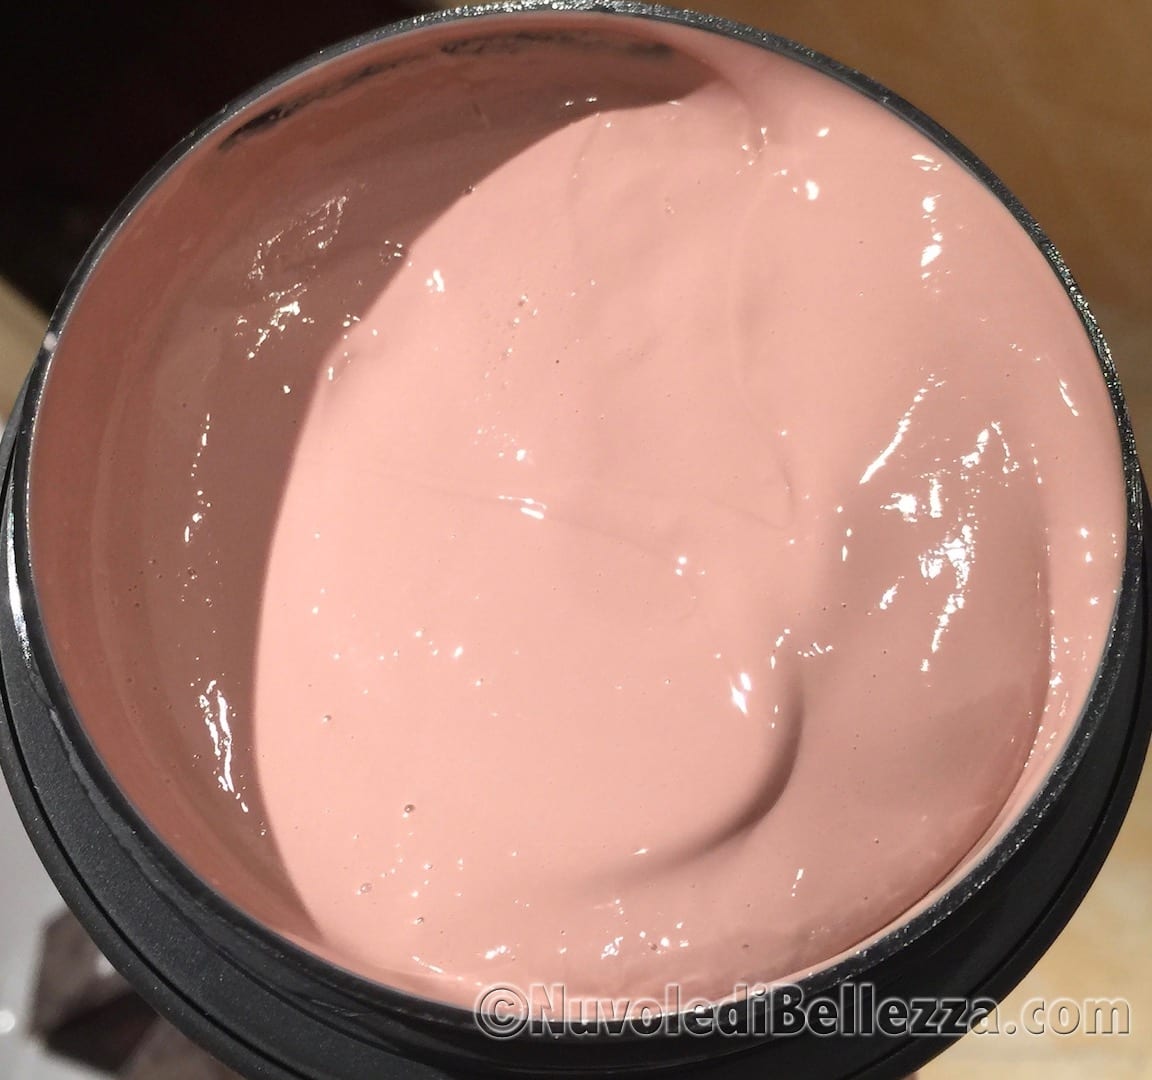 Thermo Body Mask - Firming and Sculpting